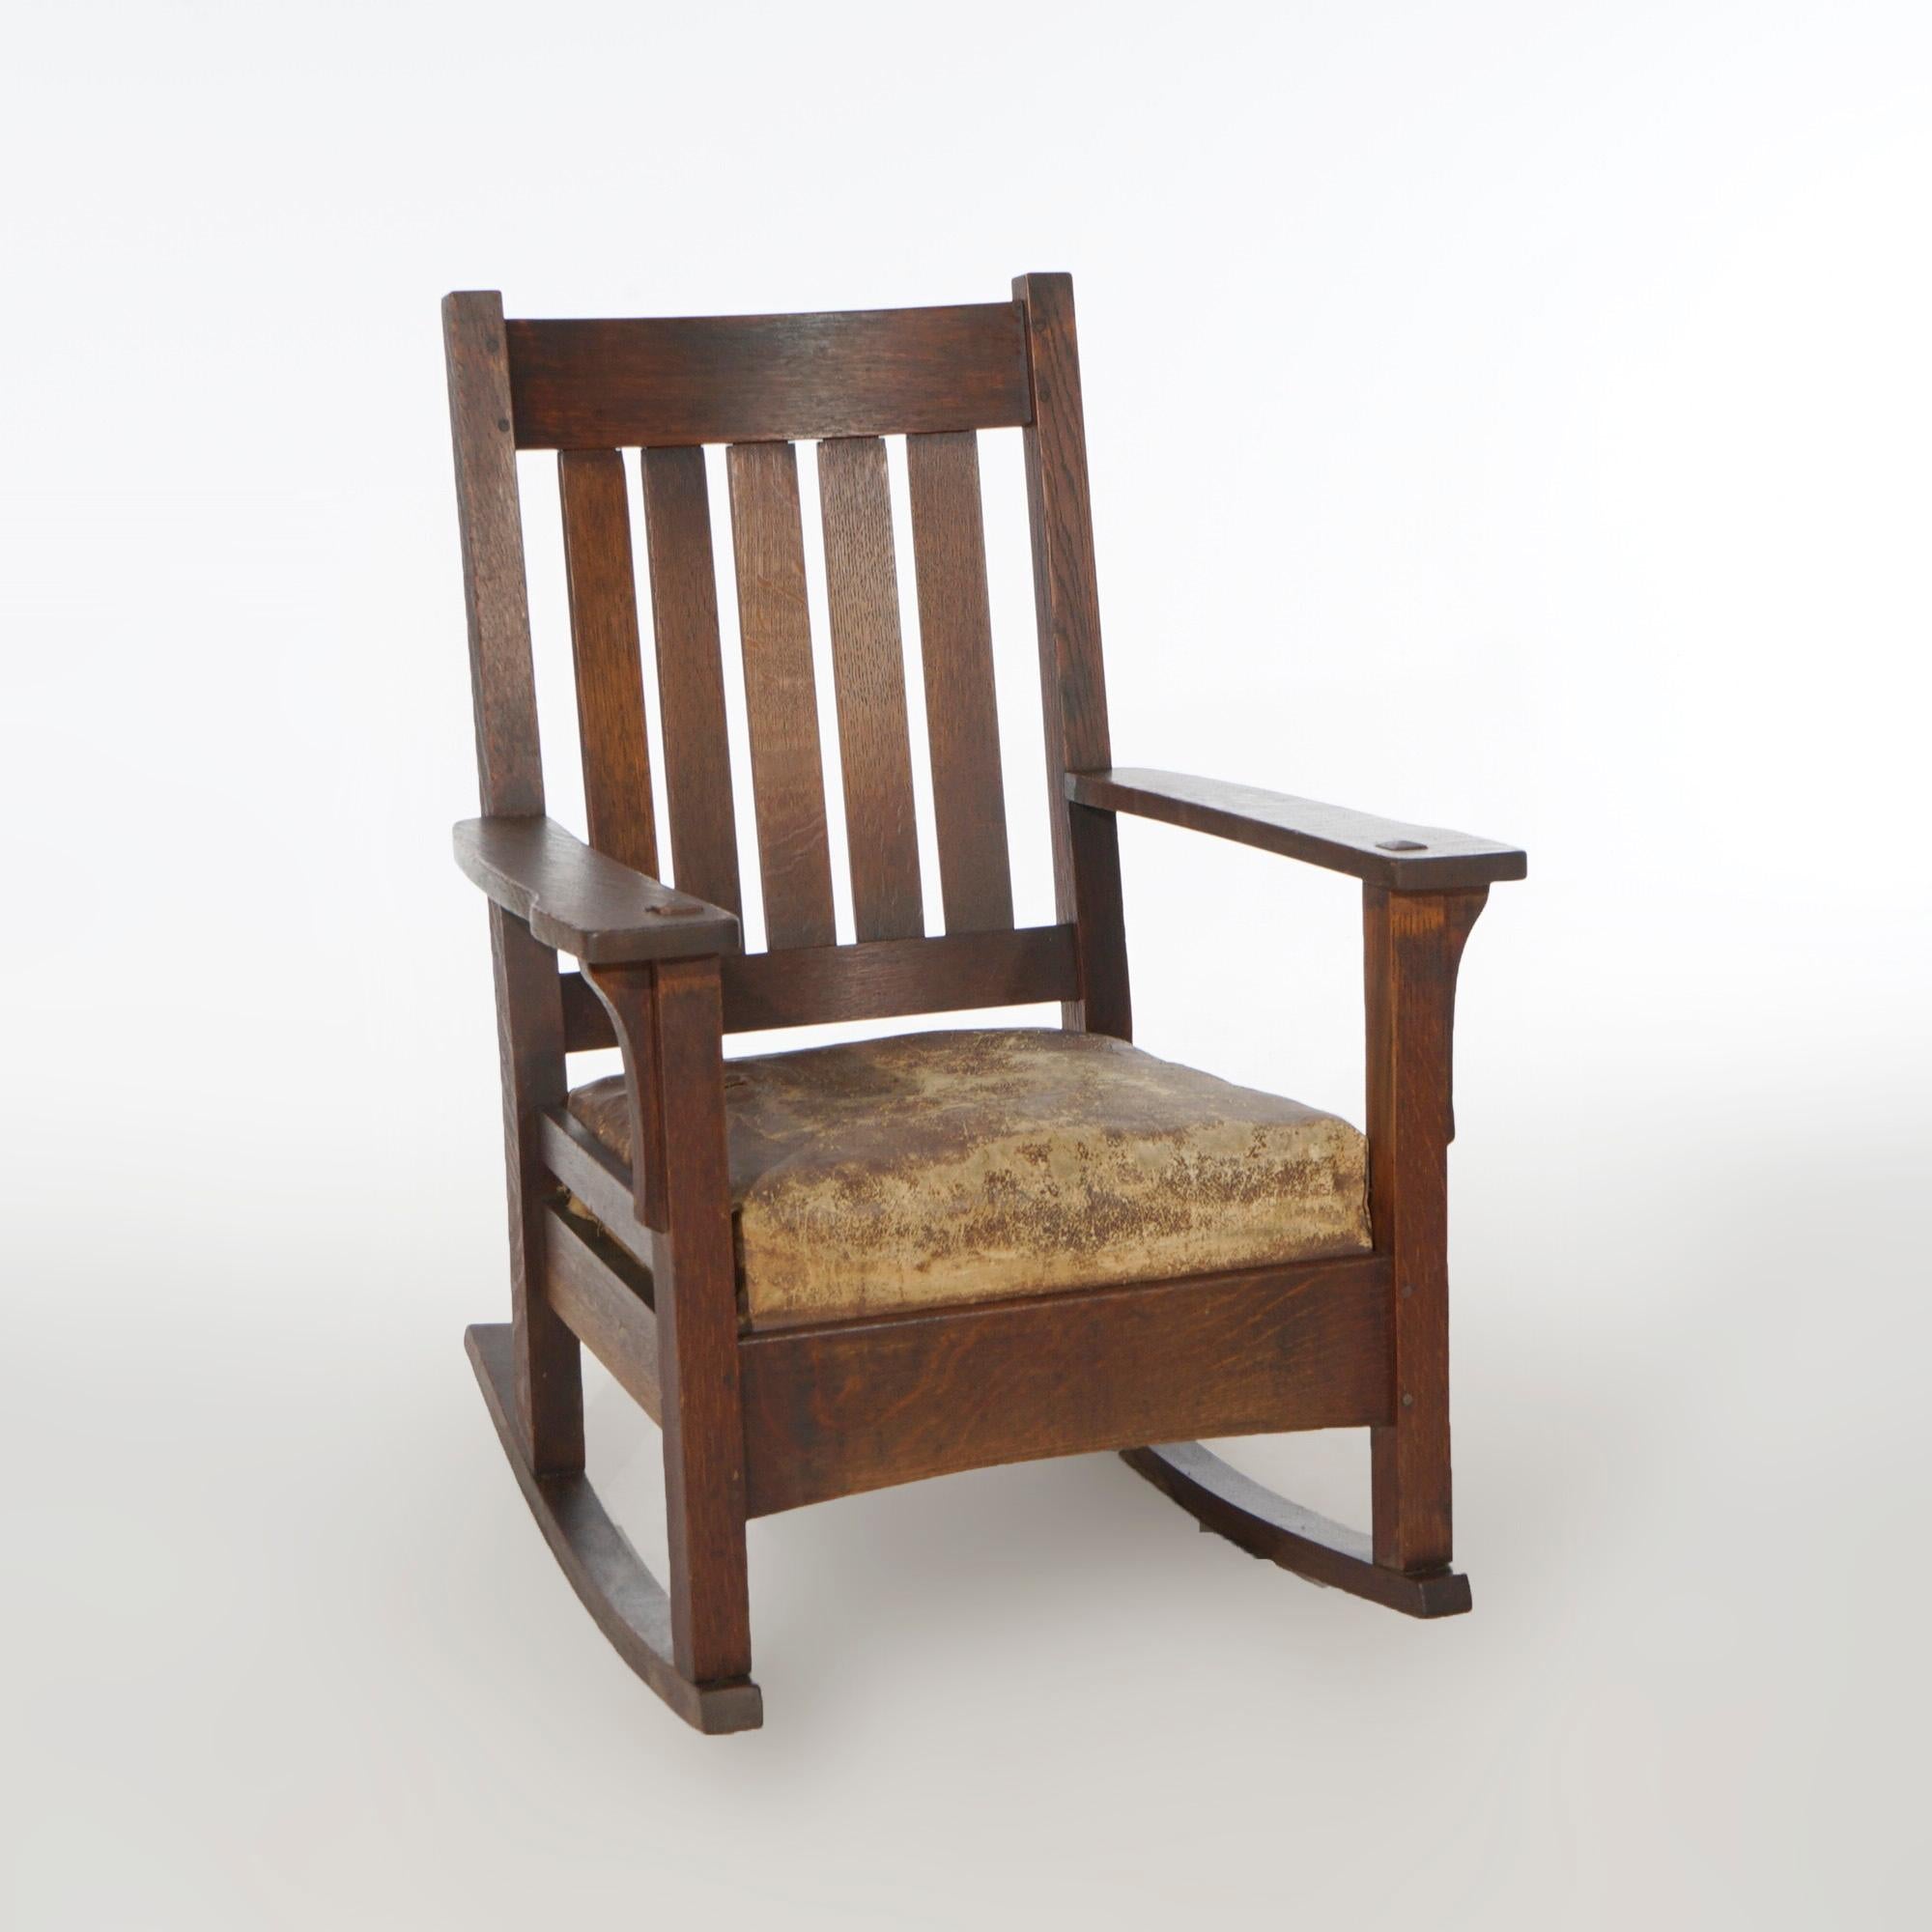 An antique Arts and Crafts Mission rocker by JM Young offers quarter sawn oak construction with slat back, c1910.

Measures- 36.75''H x 27.5''W x 30''D.

Catalogue Note: Ask about DISCOUNTED DELIVERY RATES available to most regions within 1,500